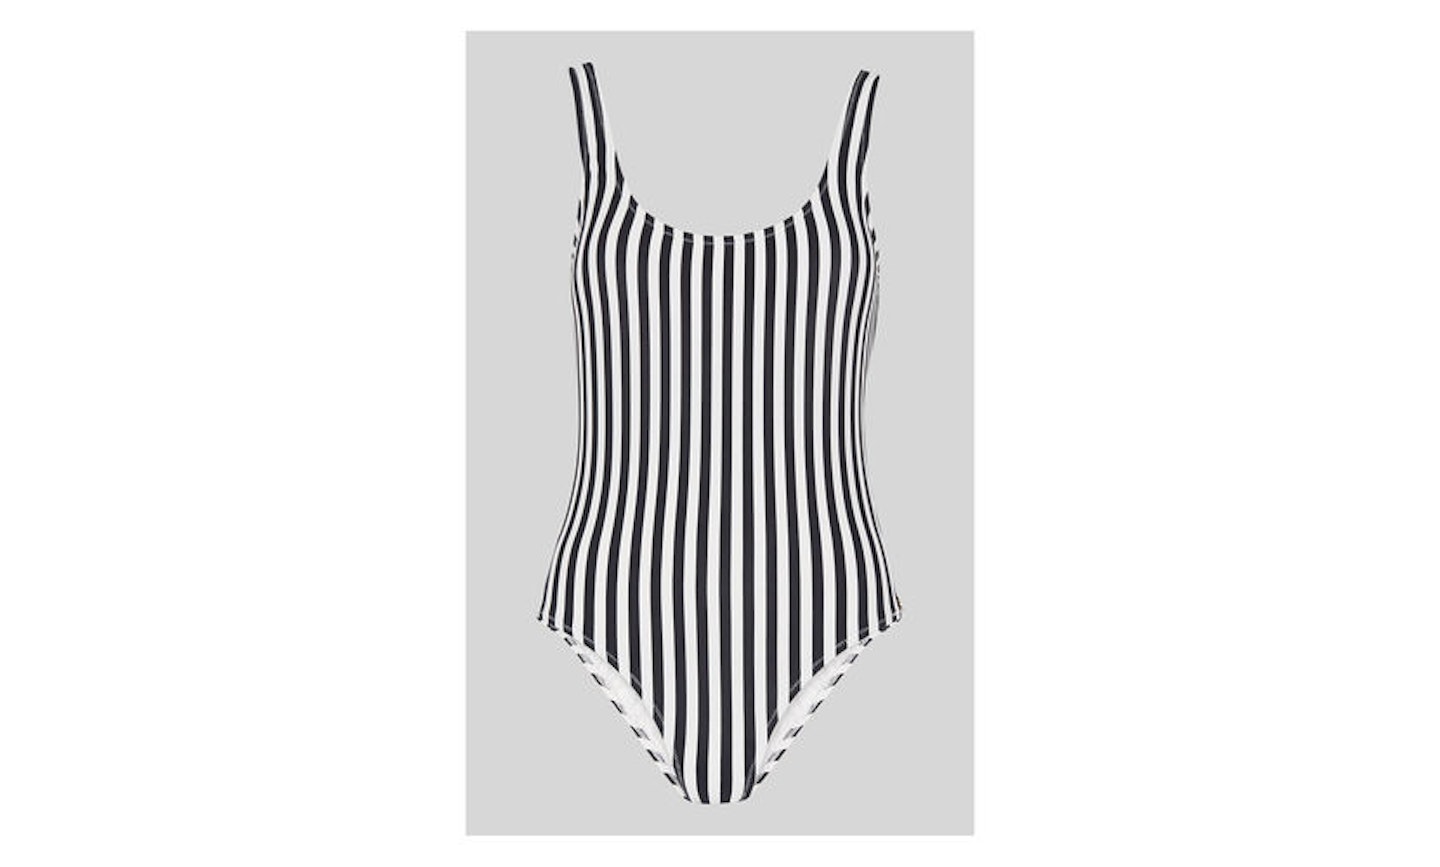 Stripe wwimsuit by Whistles, £85